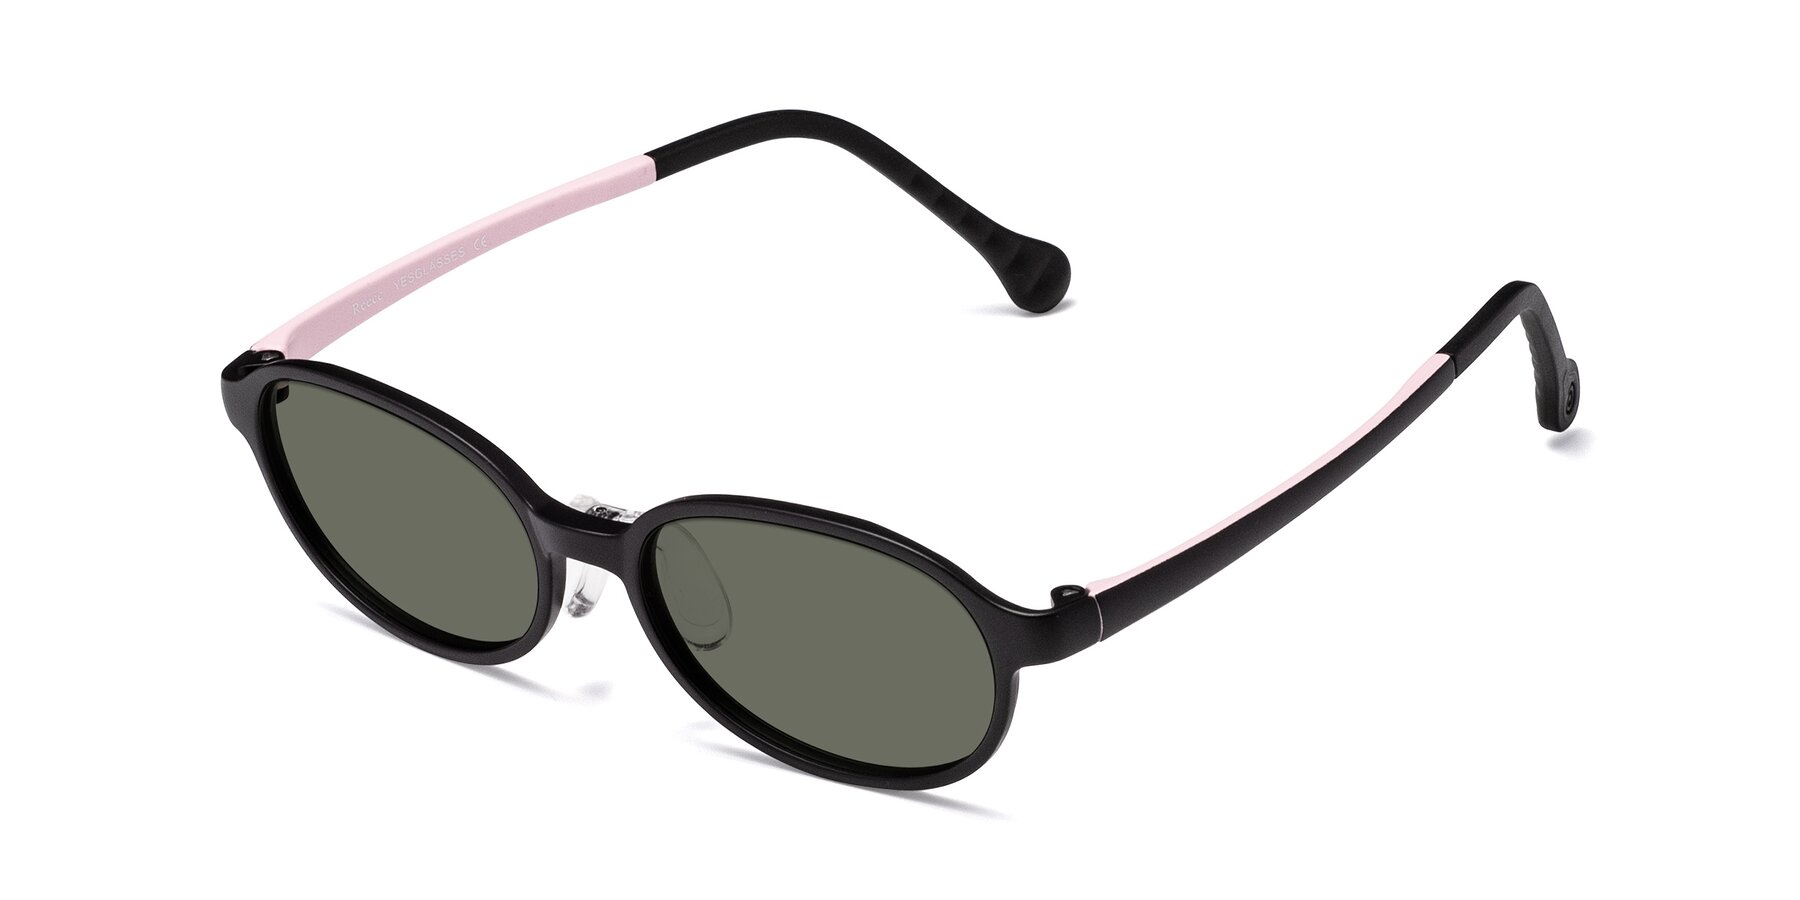 Black-Pink Lightweight Oval Full-Rim Polarized Sunglasses with Gray ...